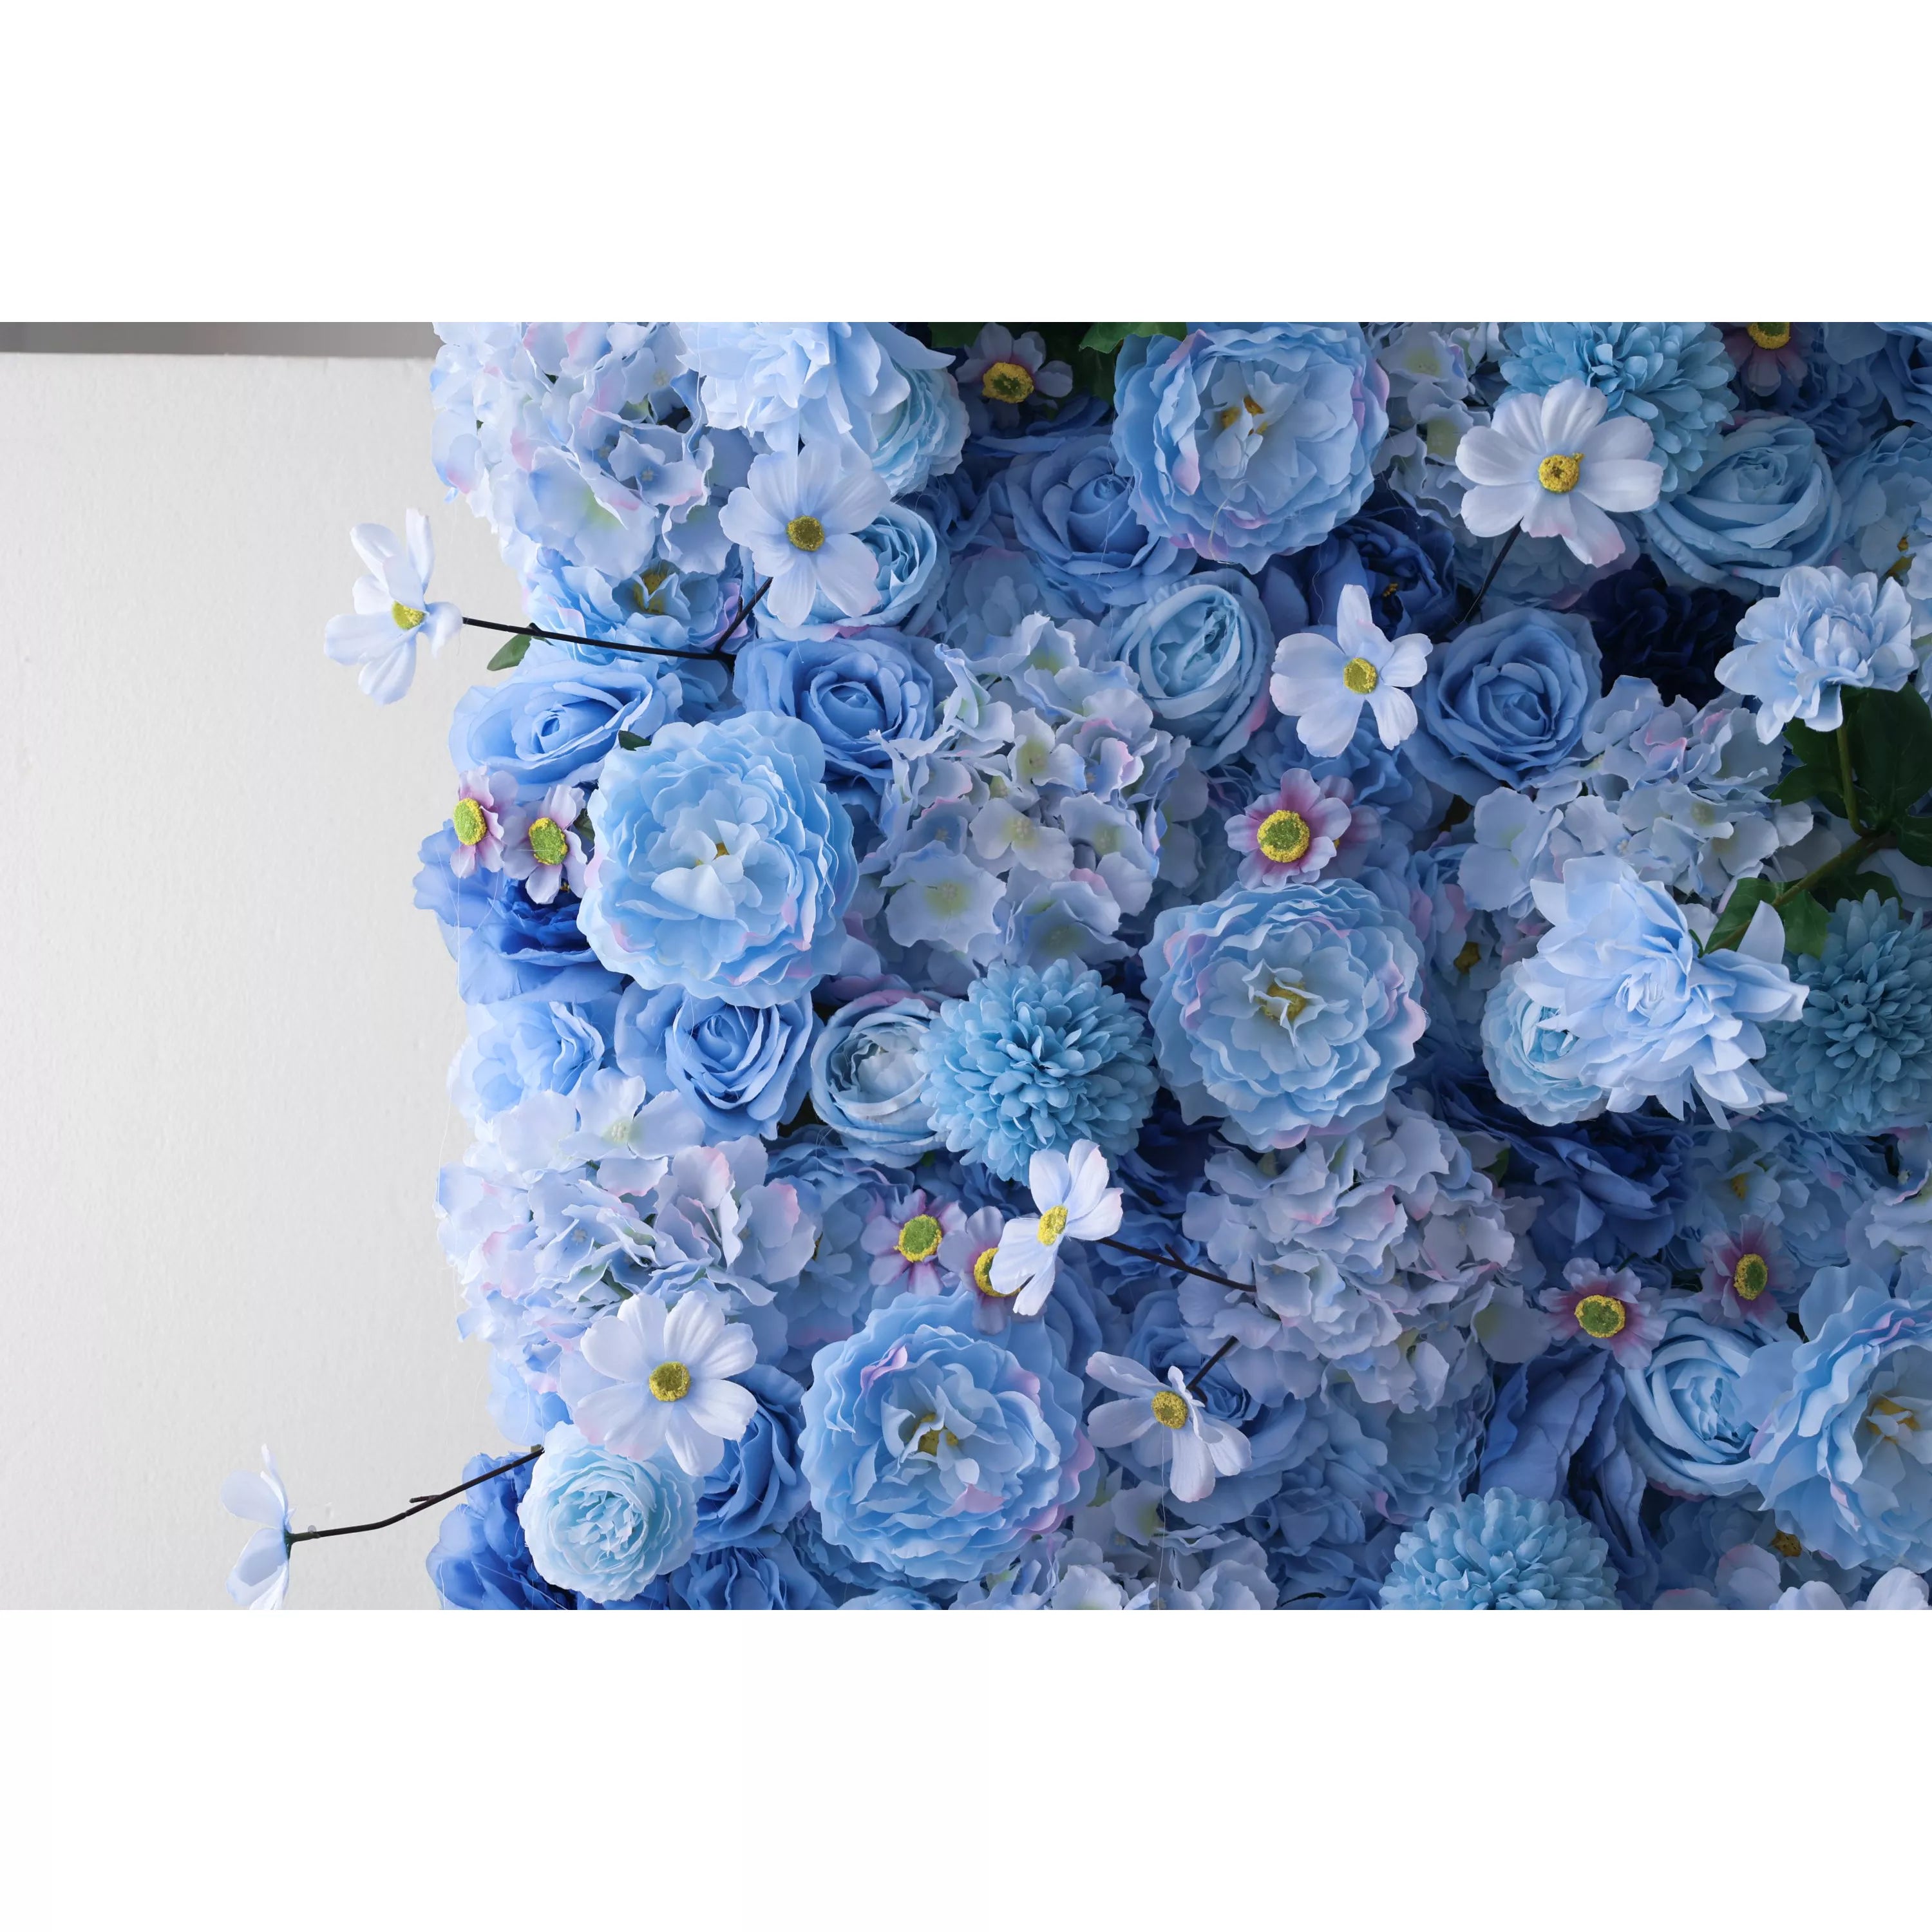 Valar Flowers Introduces: Azure Blooms Gala – An Enchanting Medley of Sky Blue & Pearly White Fabric Flowers – Prime Floral Display for Summer Fetes, Celebrations & Modern Home Accents-VF-219-4